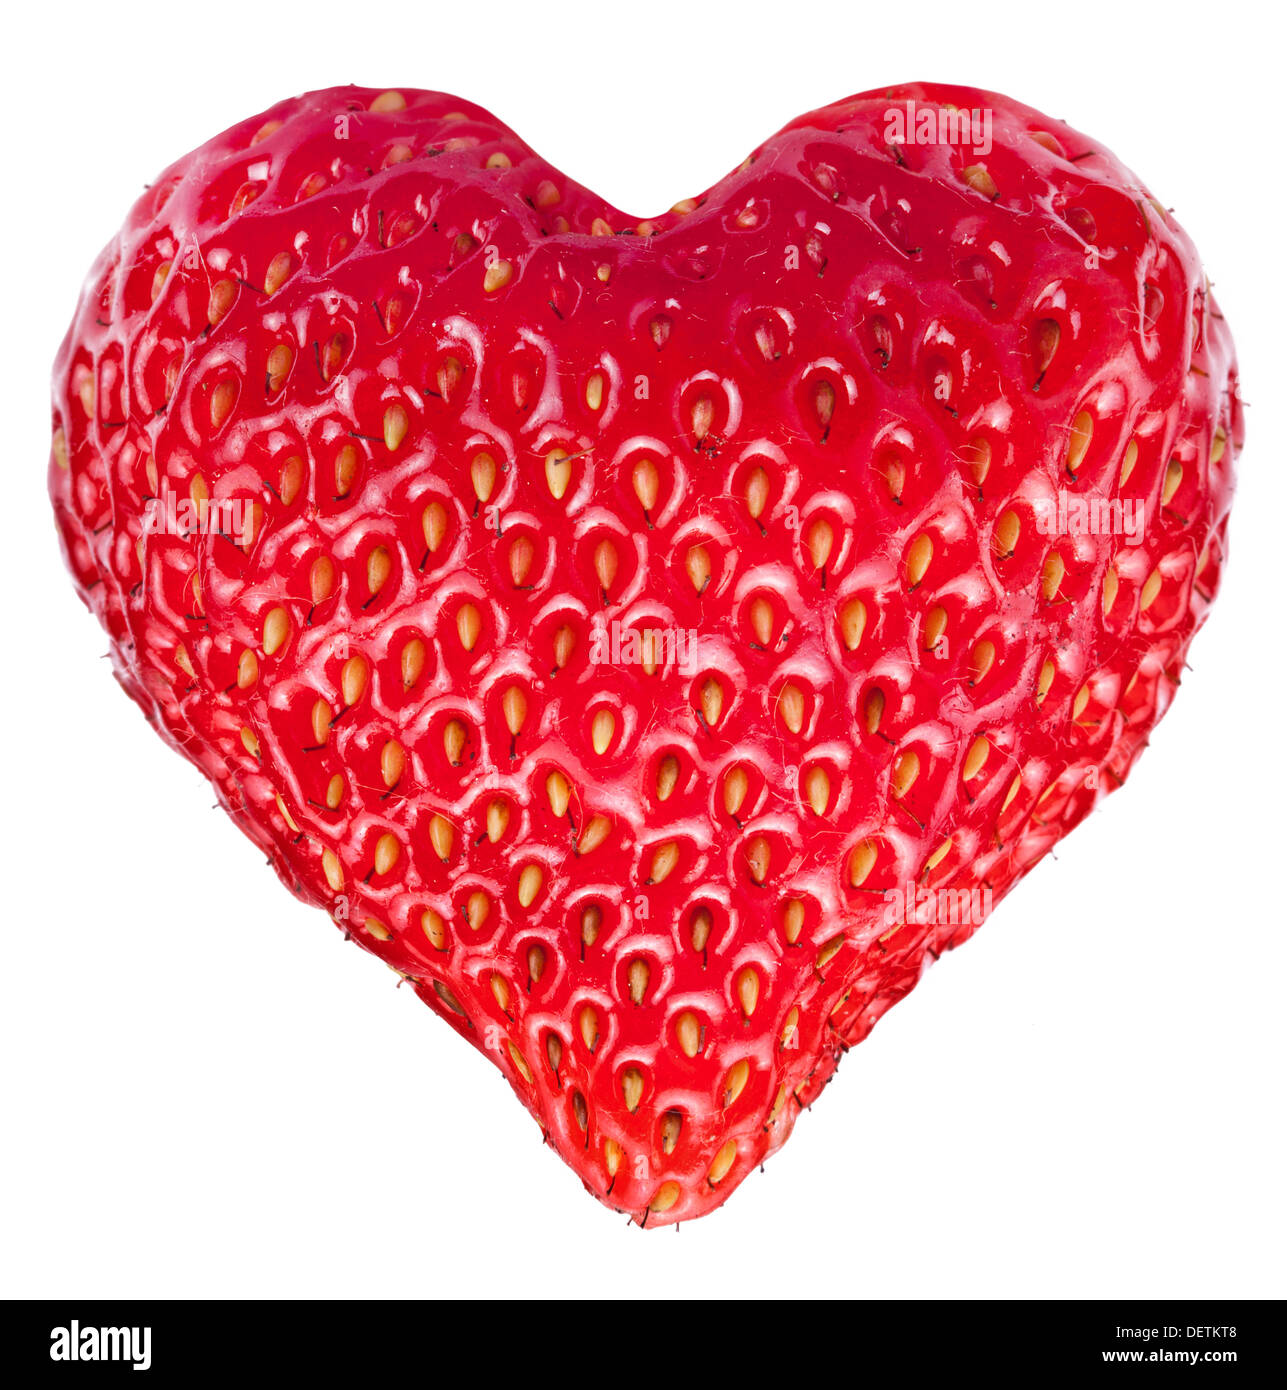 Strawberry heart isolated on a white background. Stock Photo